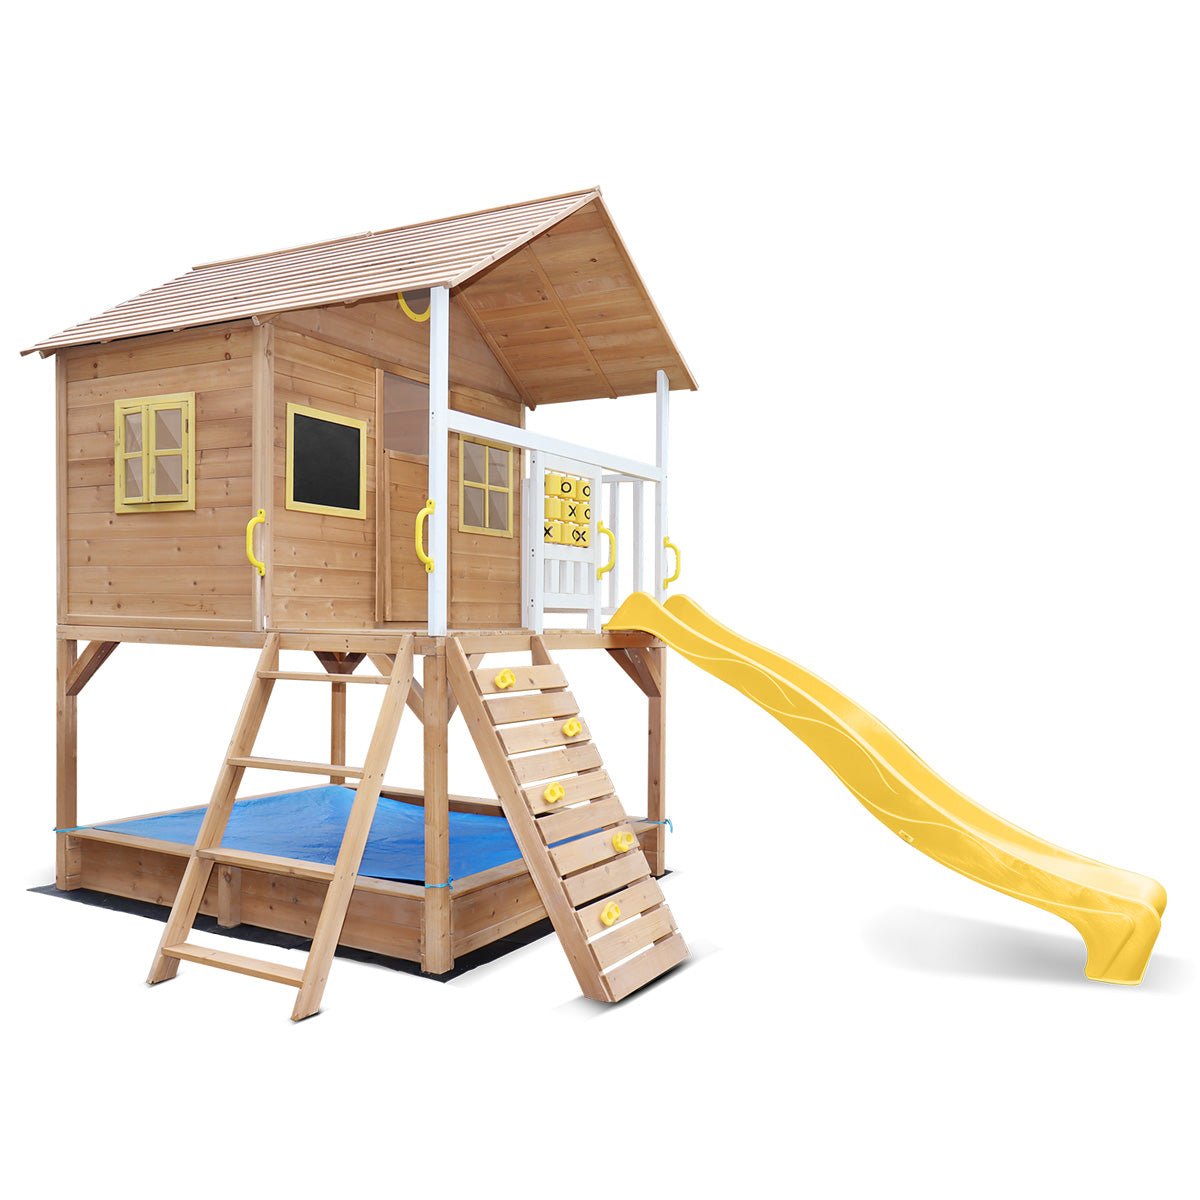 Explore Warrigal Cubby House with Yellow Slide: Create Lasting Memories